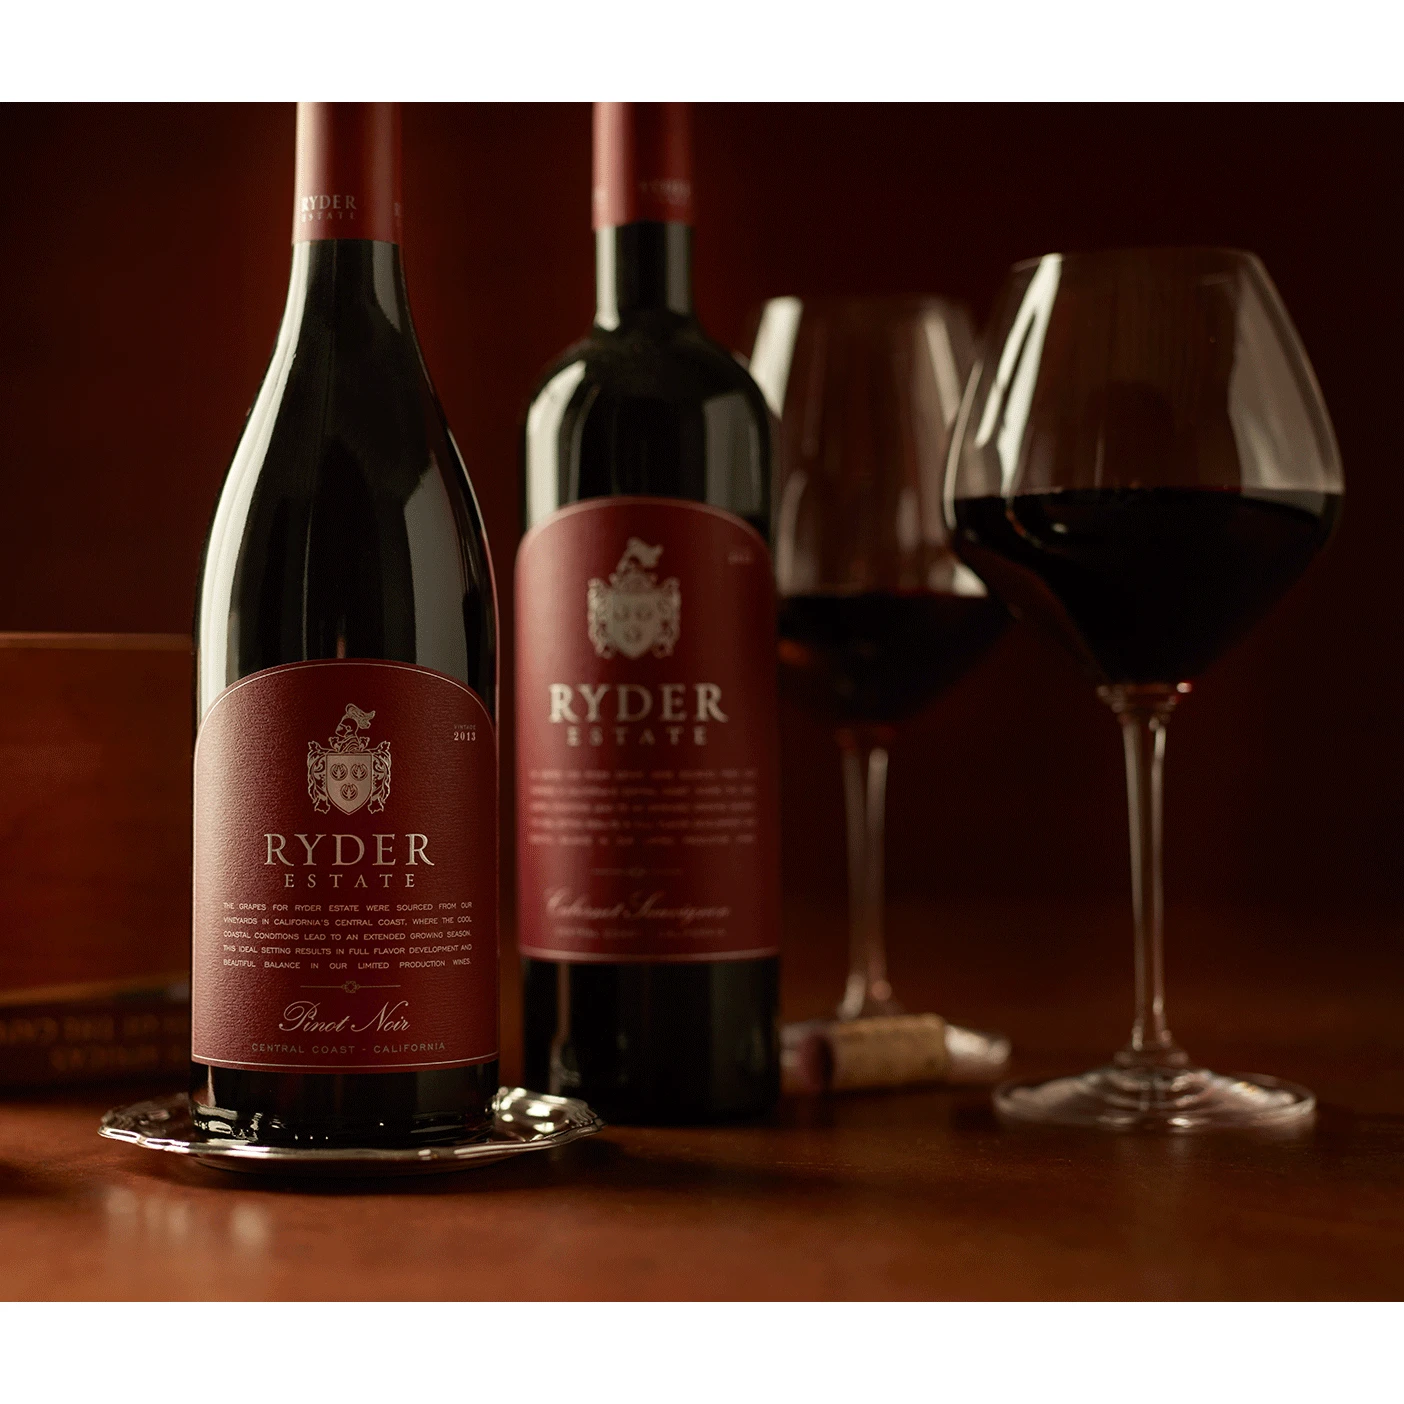 Ryder | 瑞德庄园黑皮诺干红葡萄酒 2015 | Ryder Estate Pinot Noir 2015 (Central Coast, CA）,商家California Wine Experience,价格¥275